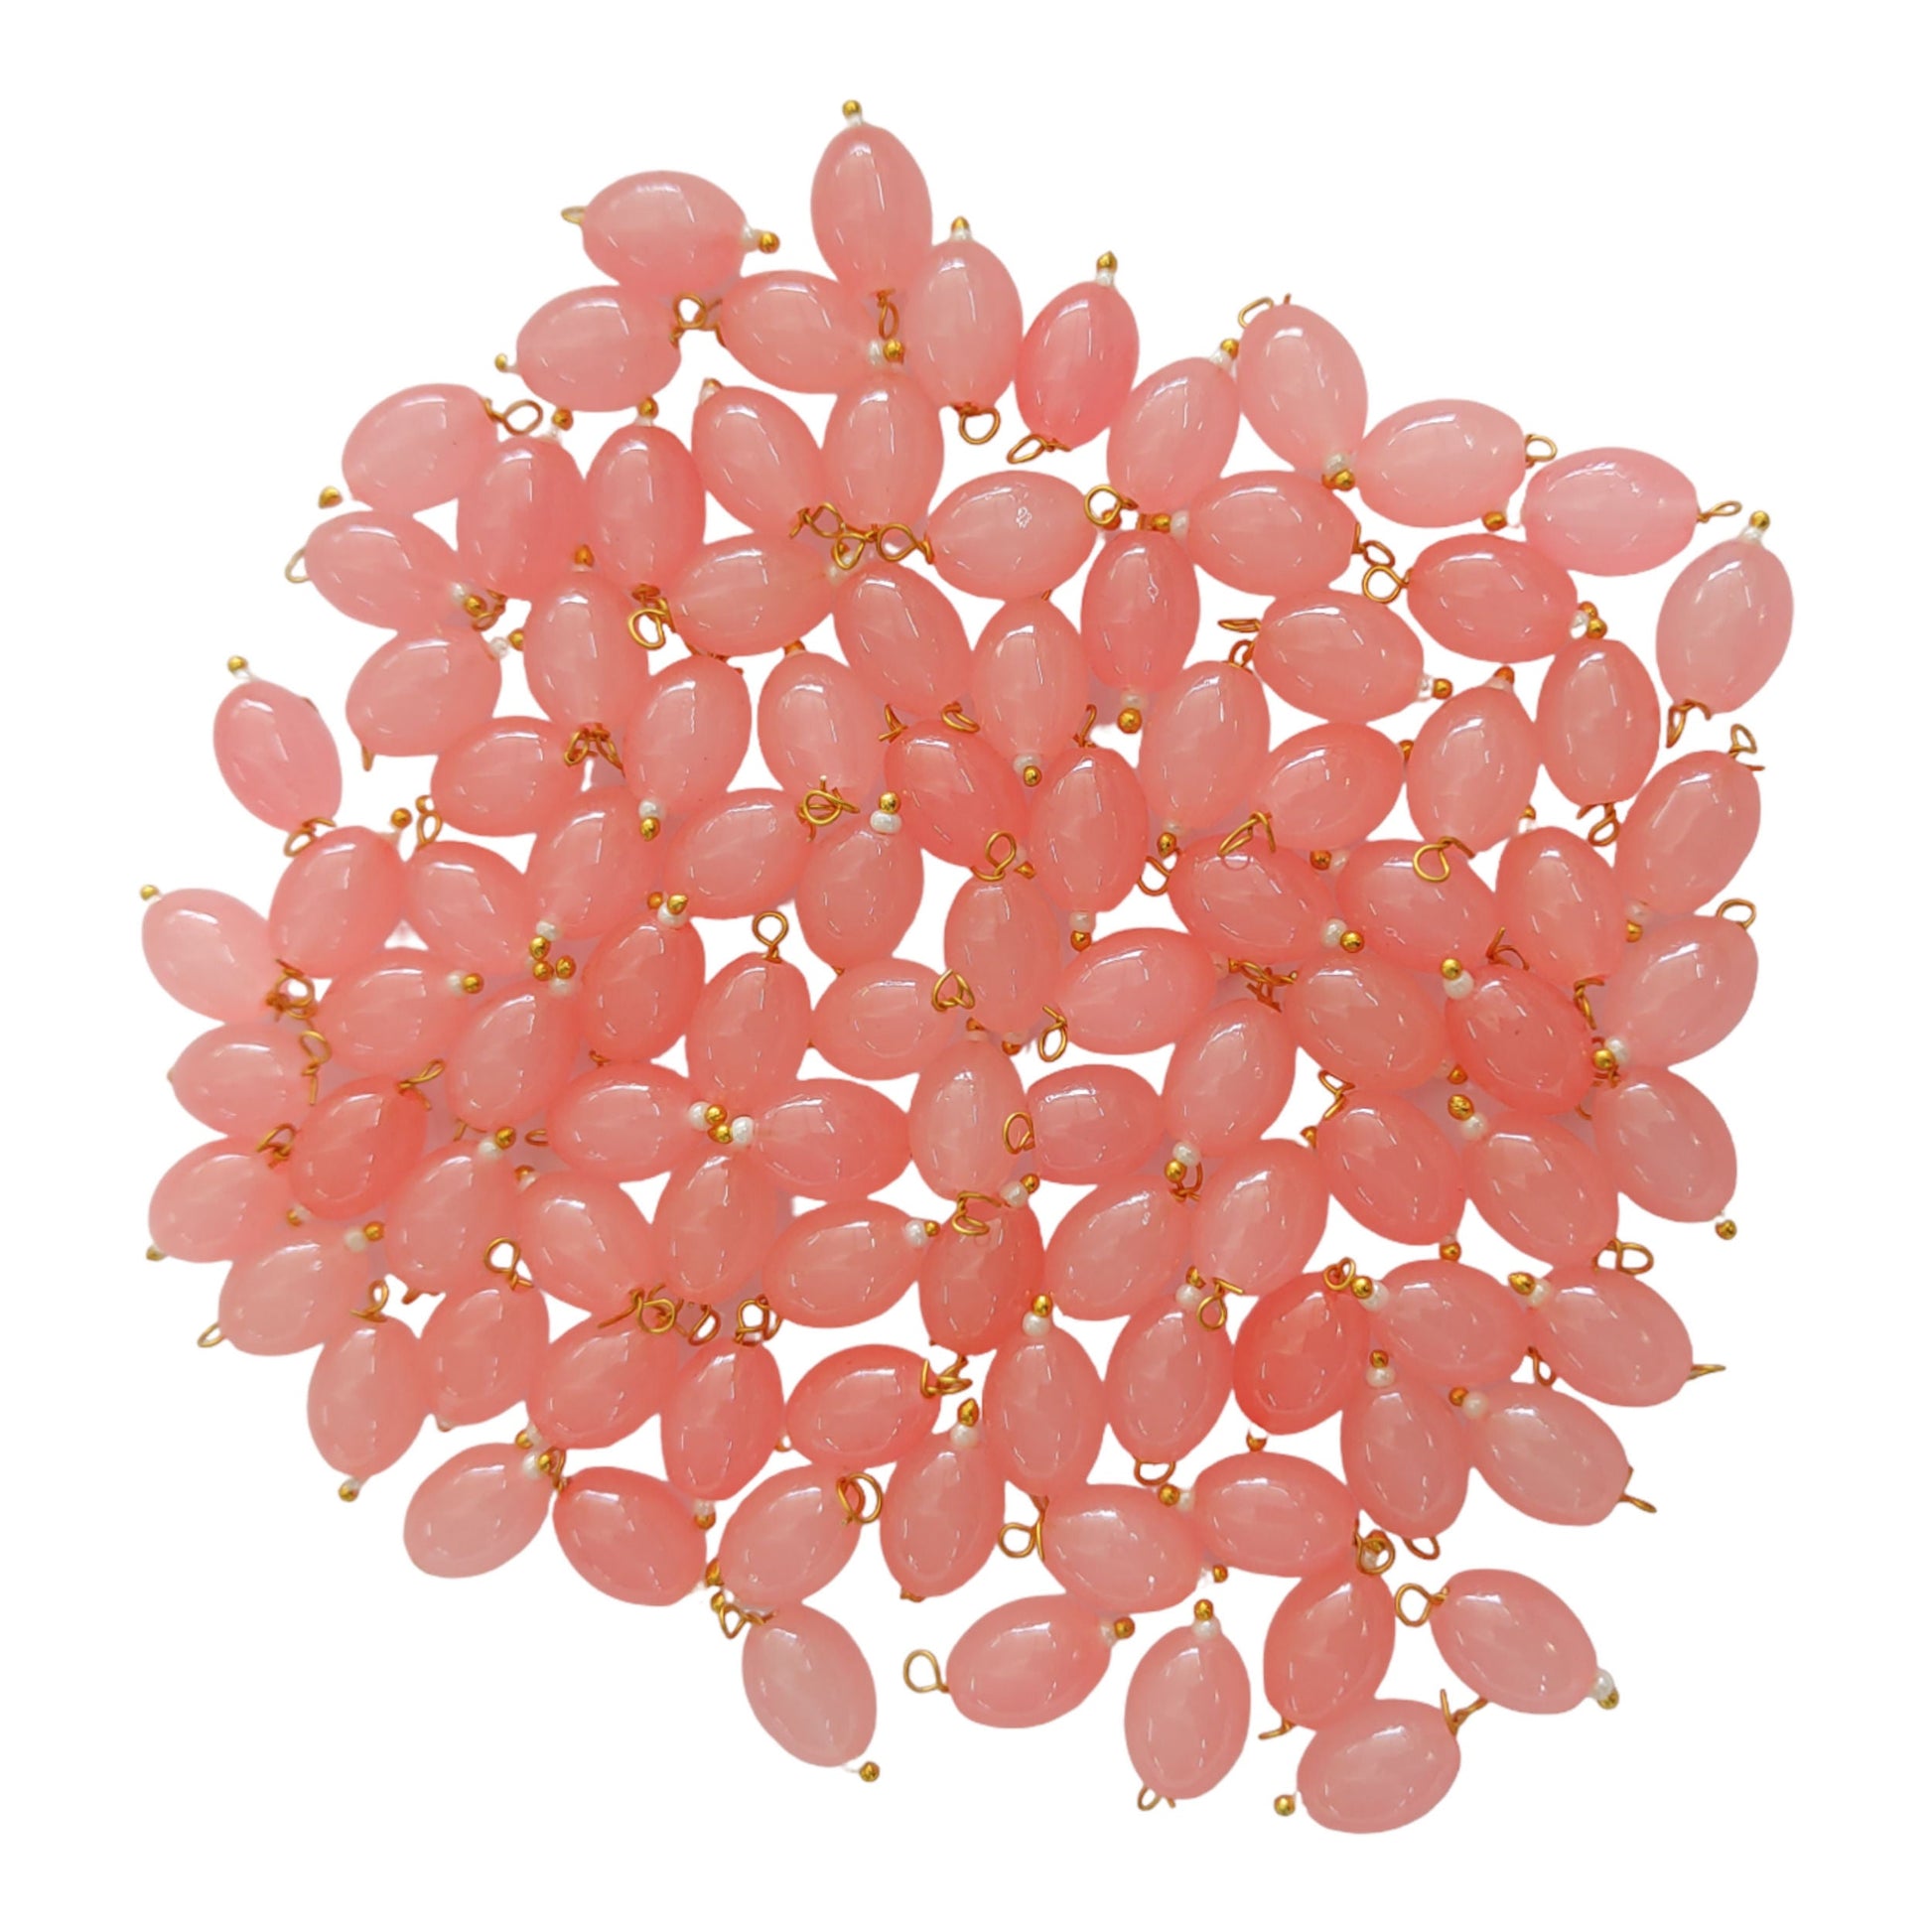 Indian Petals Colored Glass Oval Shaped with Drop Beads Ideal for Jewelry designing, Gift, Arts and Craft Making, 8x11mm